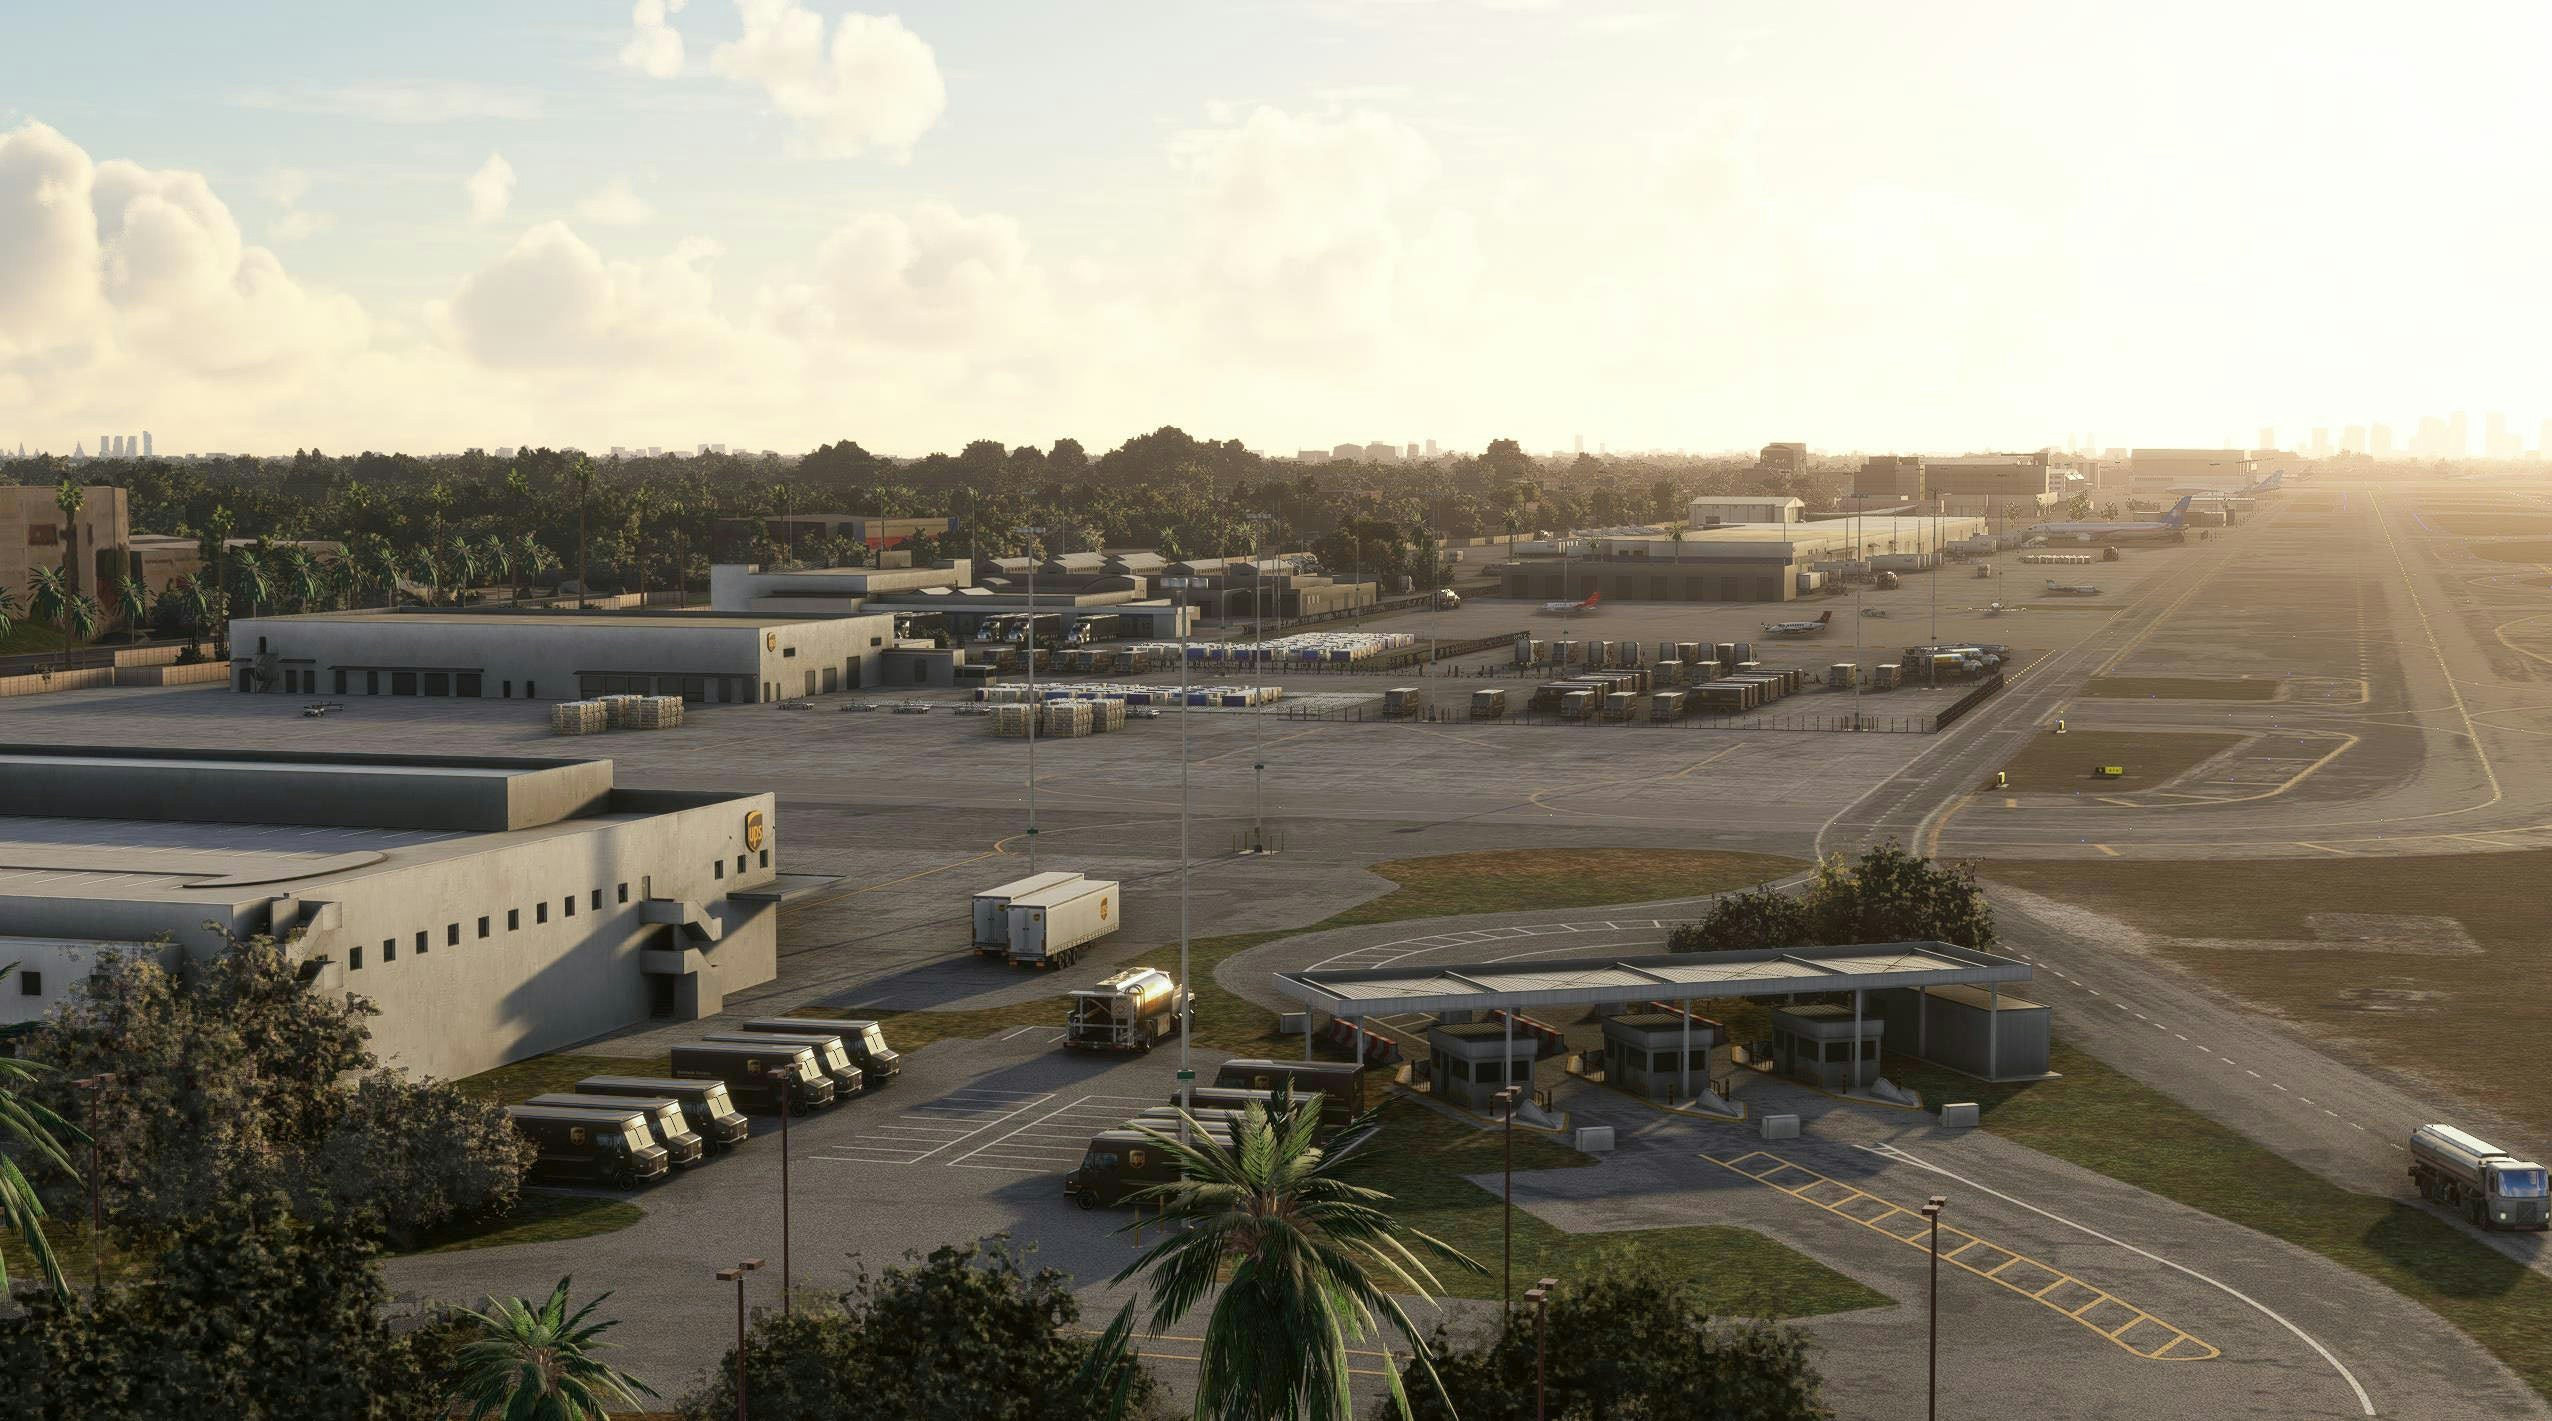 BMWorld & AmSim Releases Miami Intl Airport for MSFS